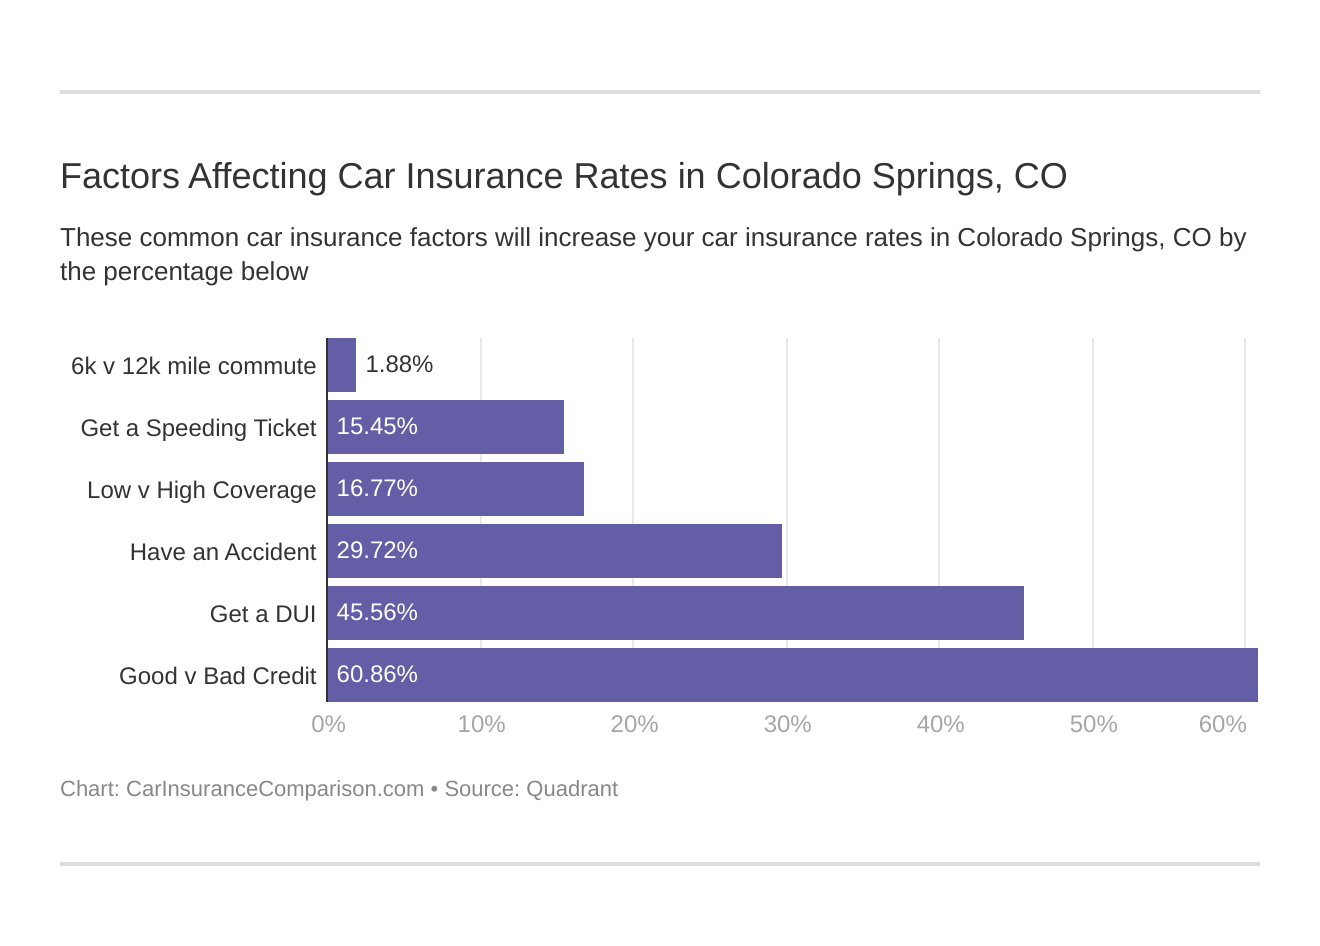 Factors Affecting Car Insurance Rates in Colorado Springs, CO